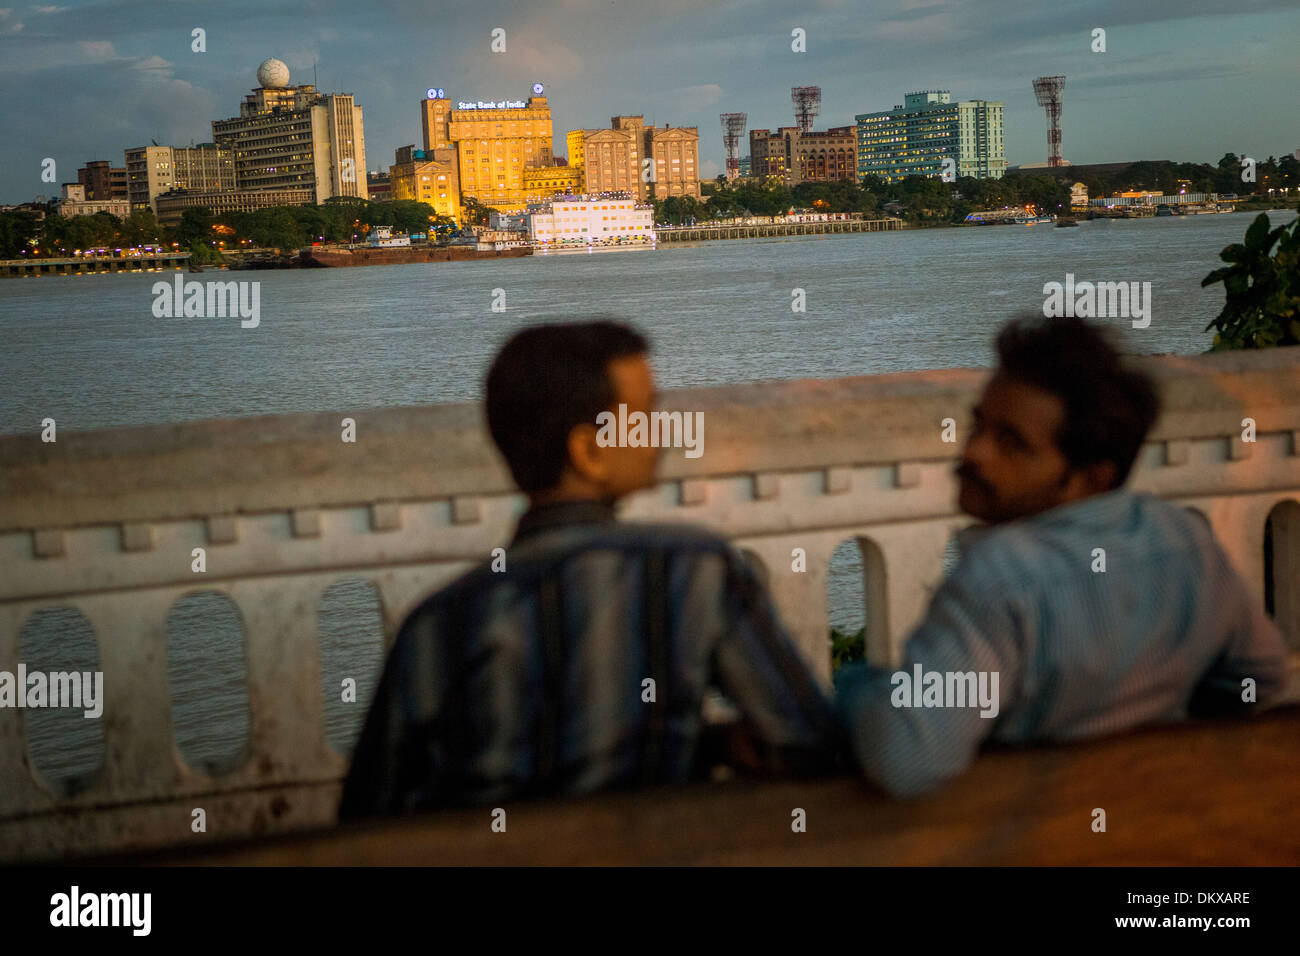 Calcutta (Kolkata), India as seen from the Hooghly River. Stock Photo